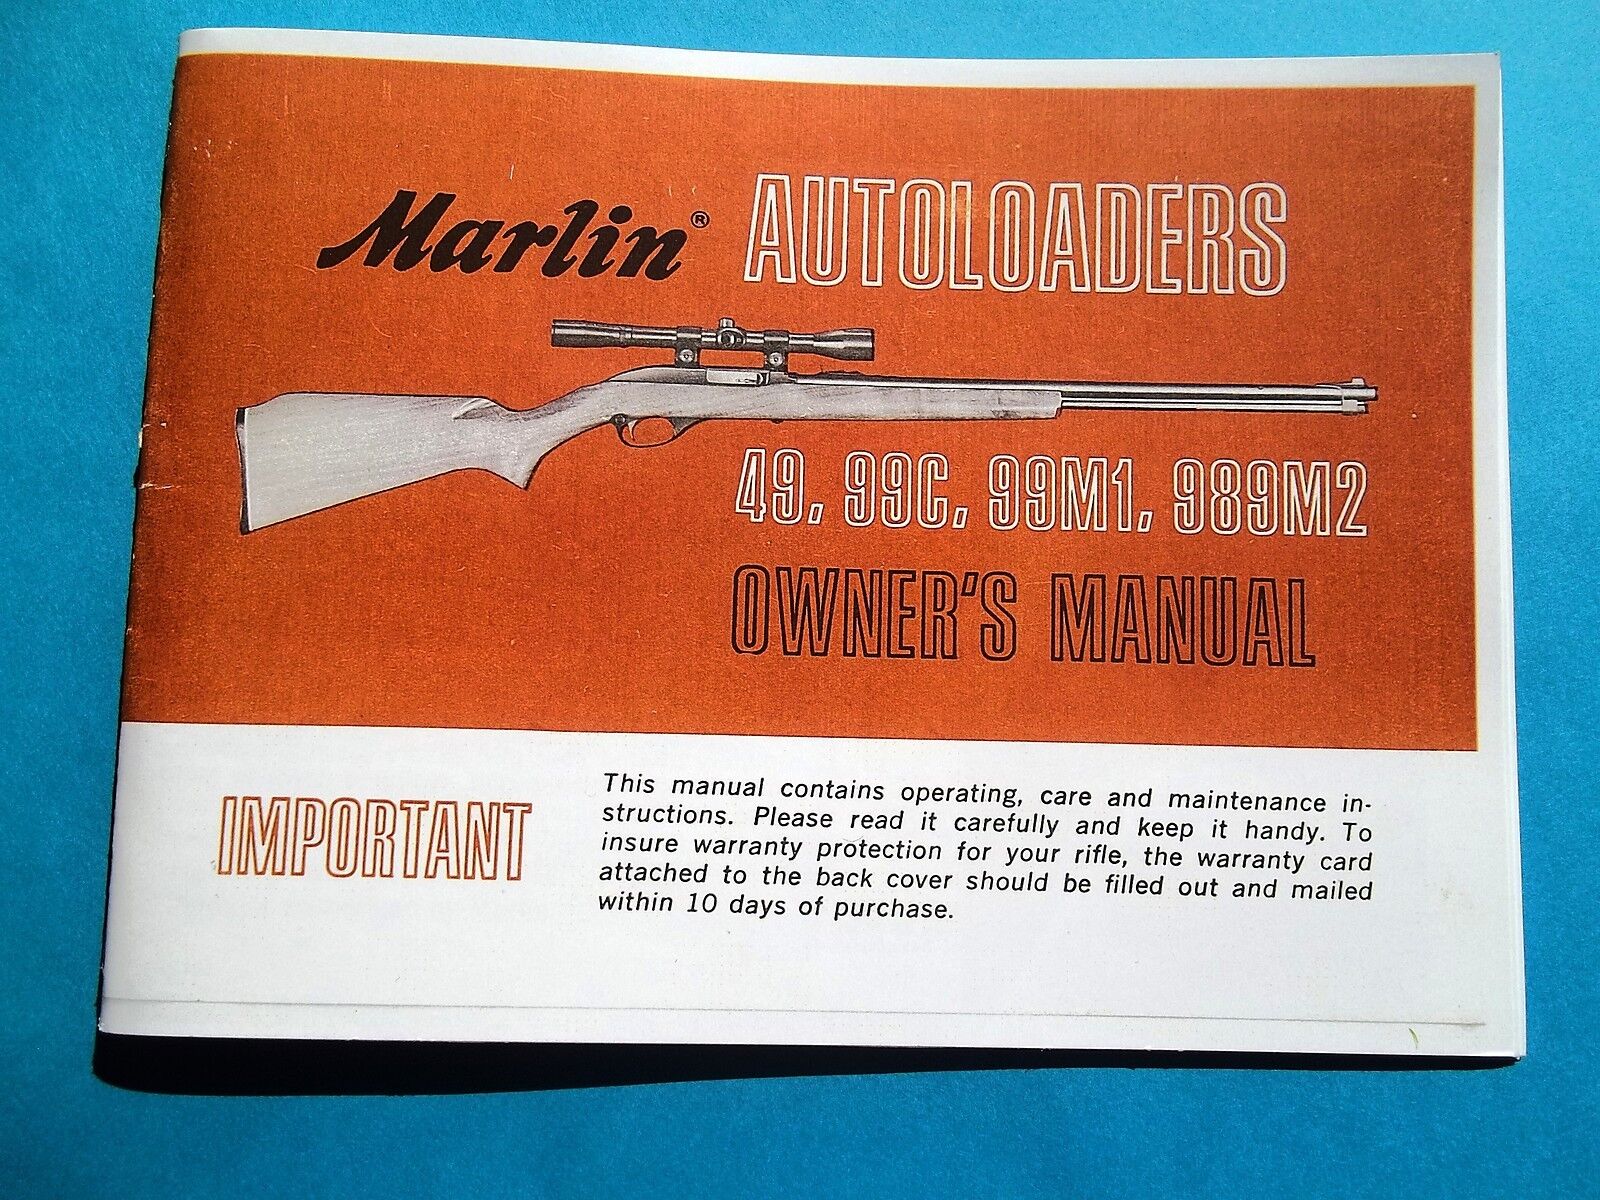 MARLIN MODEL 49, 99C, 99M1, 989M2 SEMI-AUTO OWNERS INSTRUCTION MANUAL 15 pages